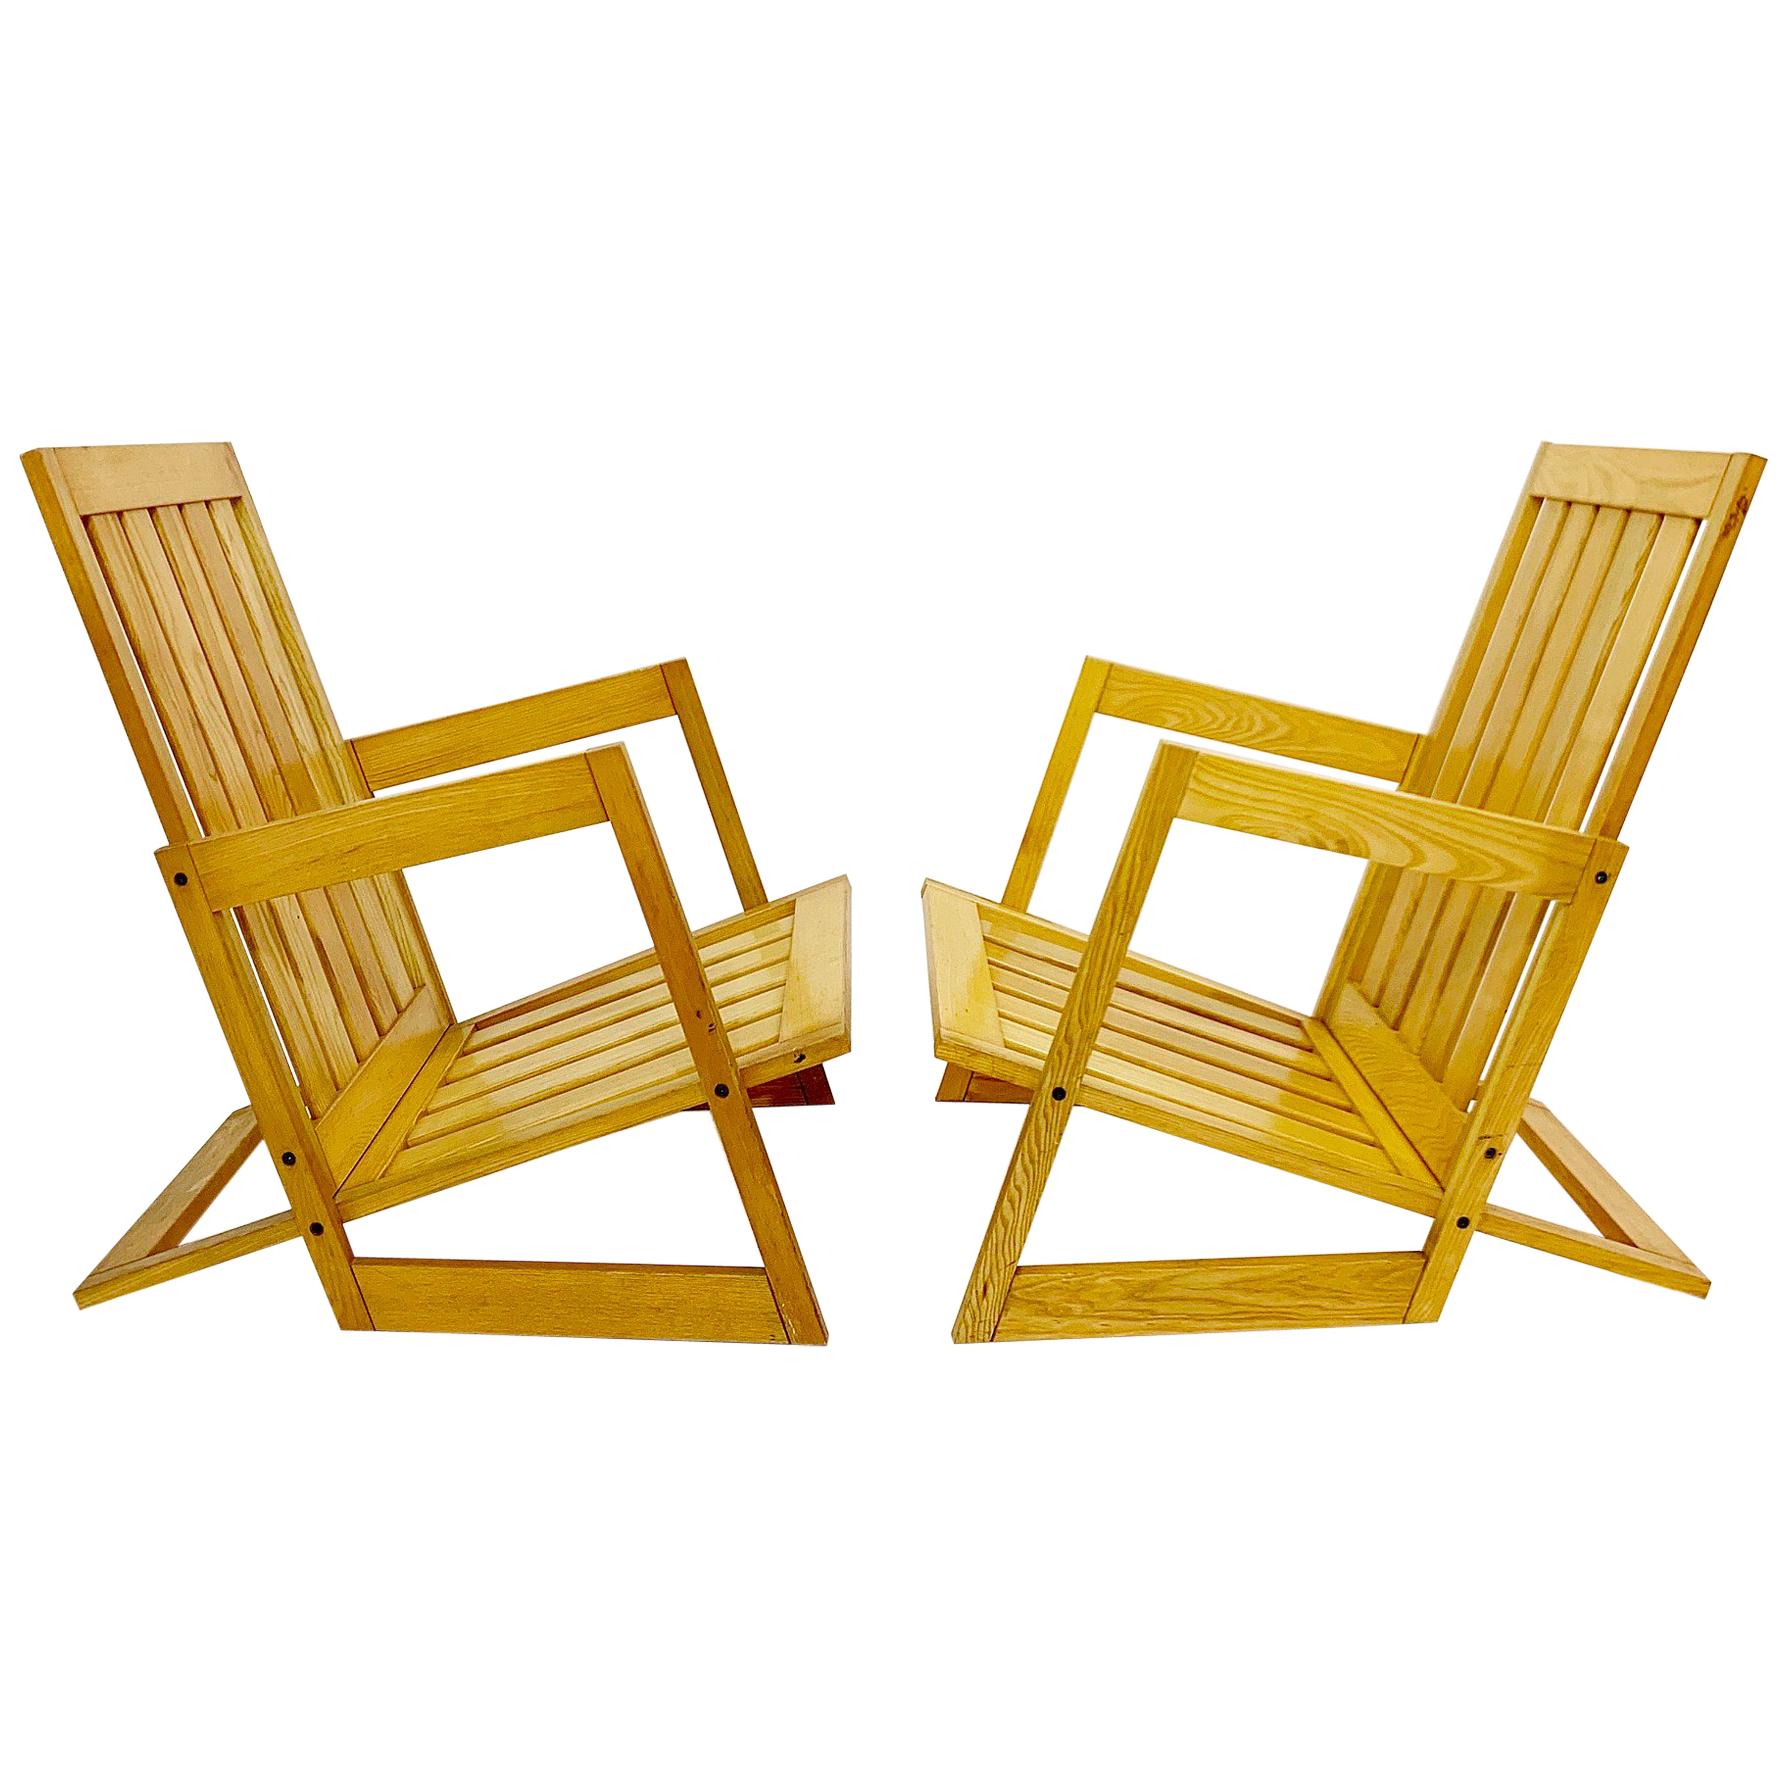 Pair of Ash Armchairs